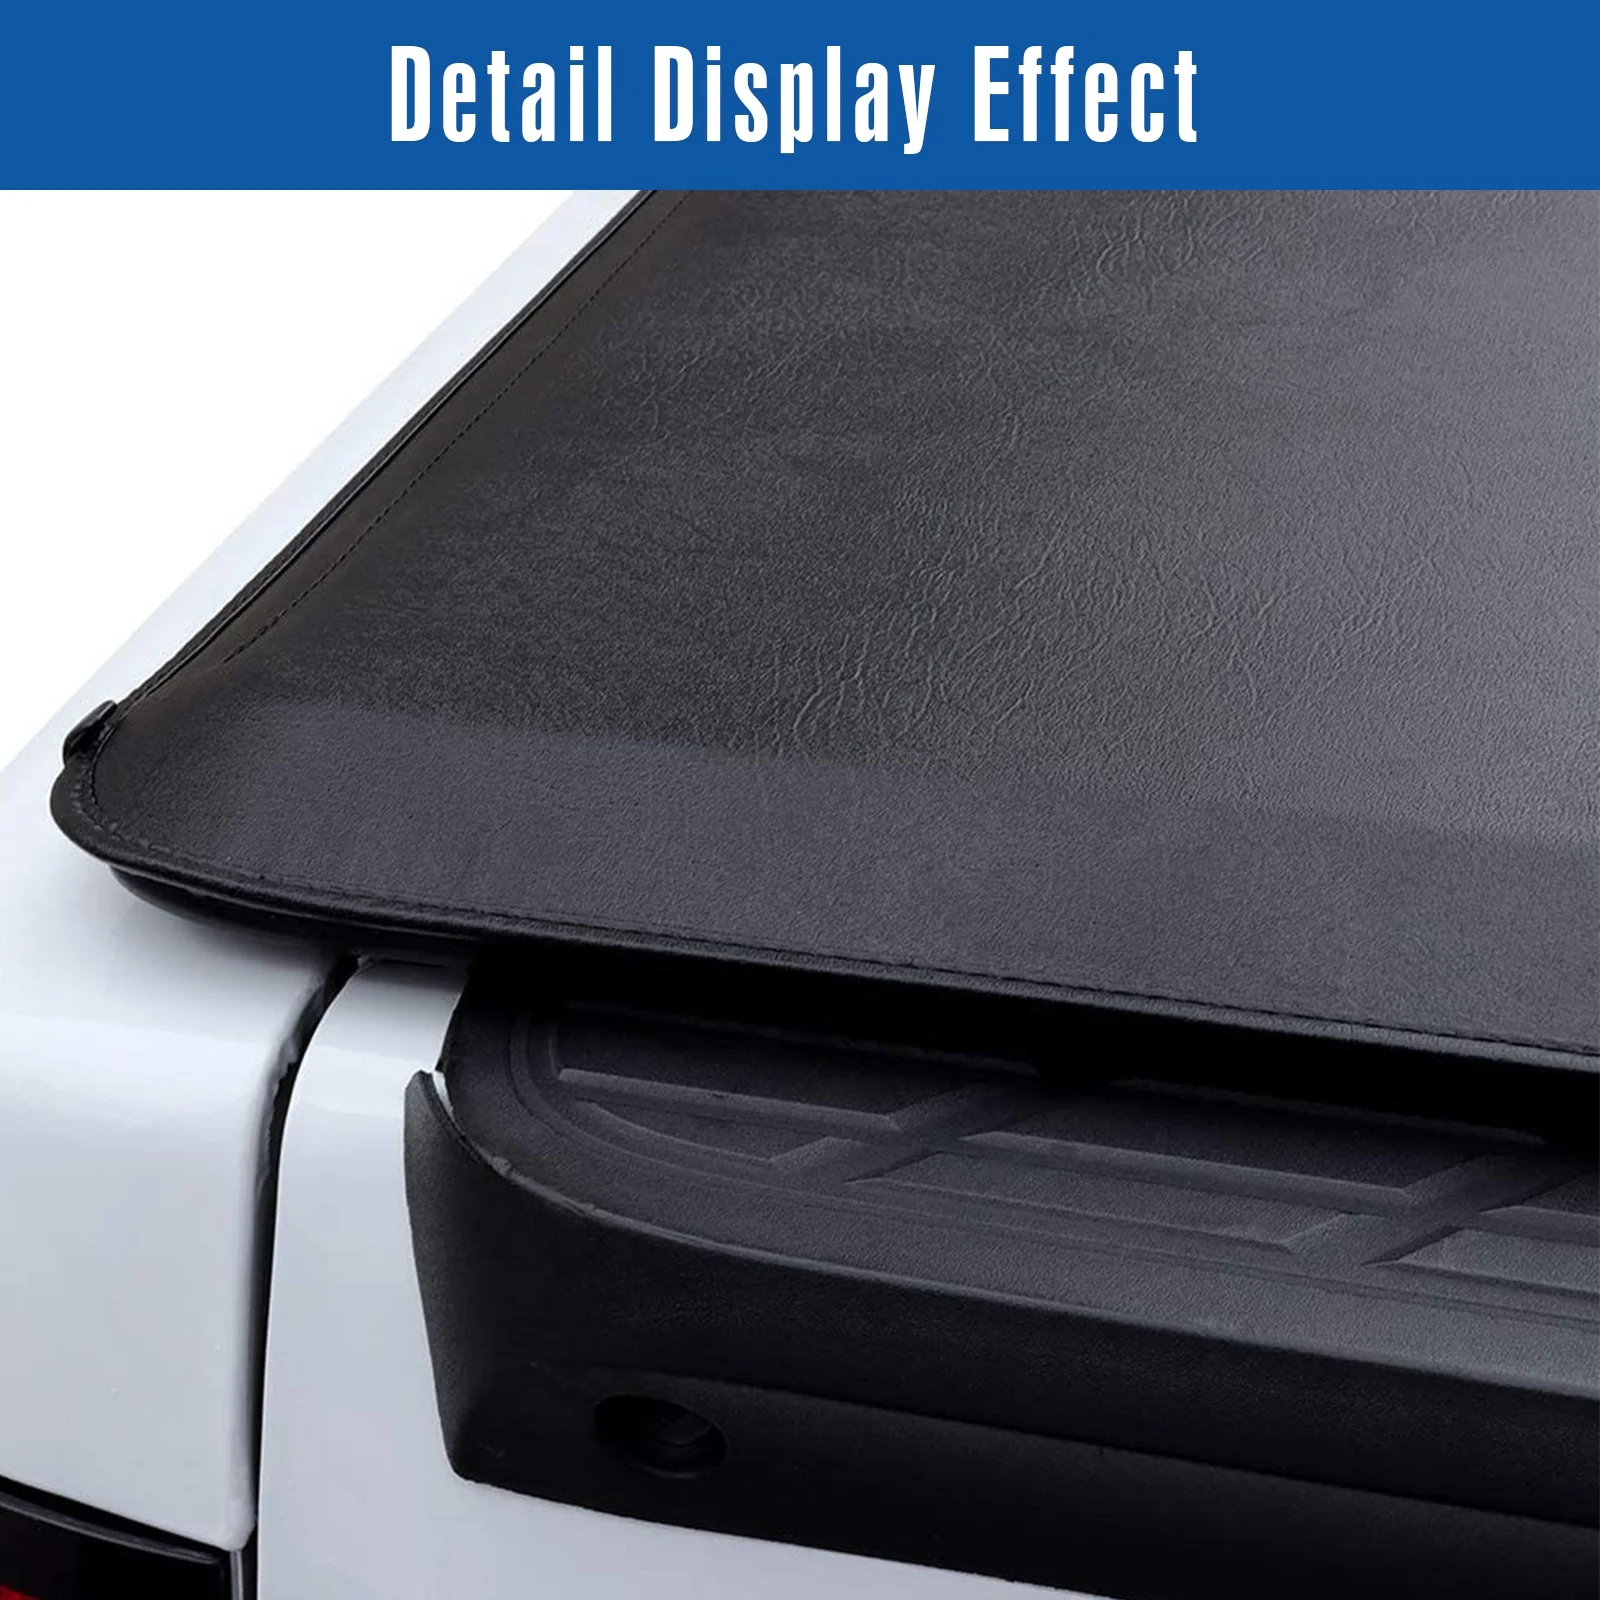 Factory High Quality 4x4 Retractable Pickup Truck Bed Cover Soft Multifunction Tonneau Cover For Toyota